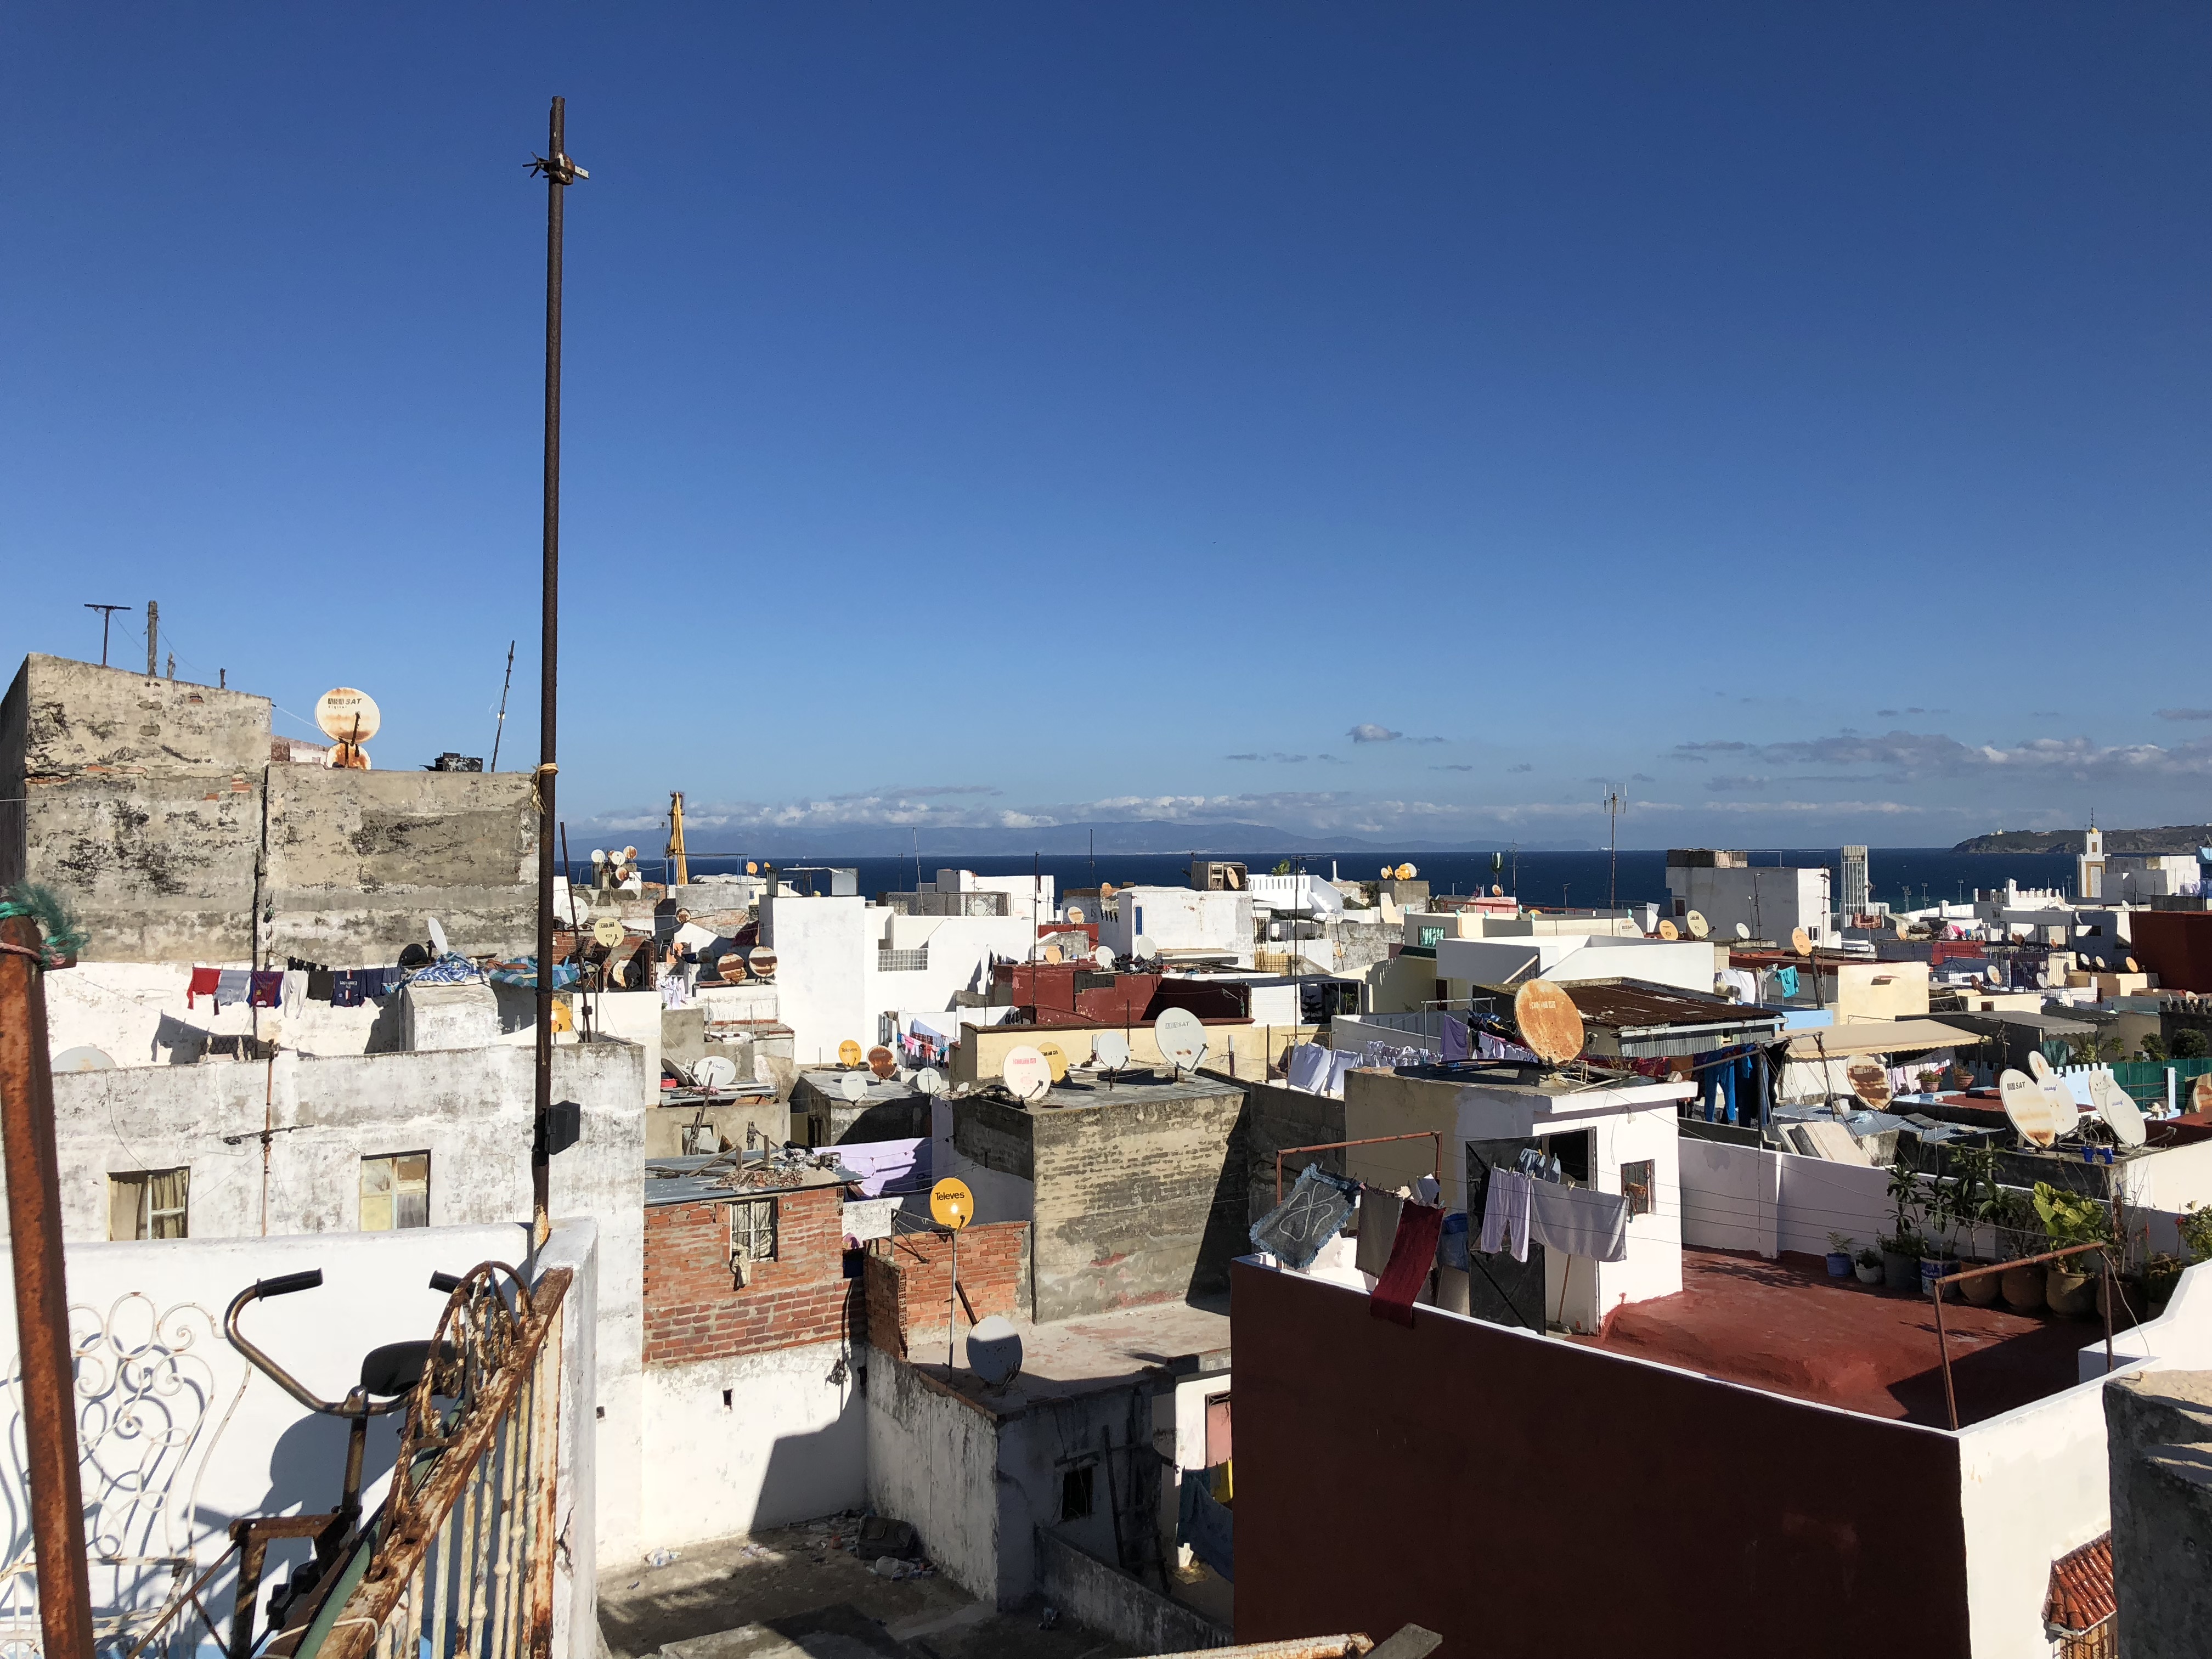 Tangier, A Quick Stop